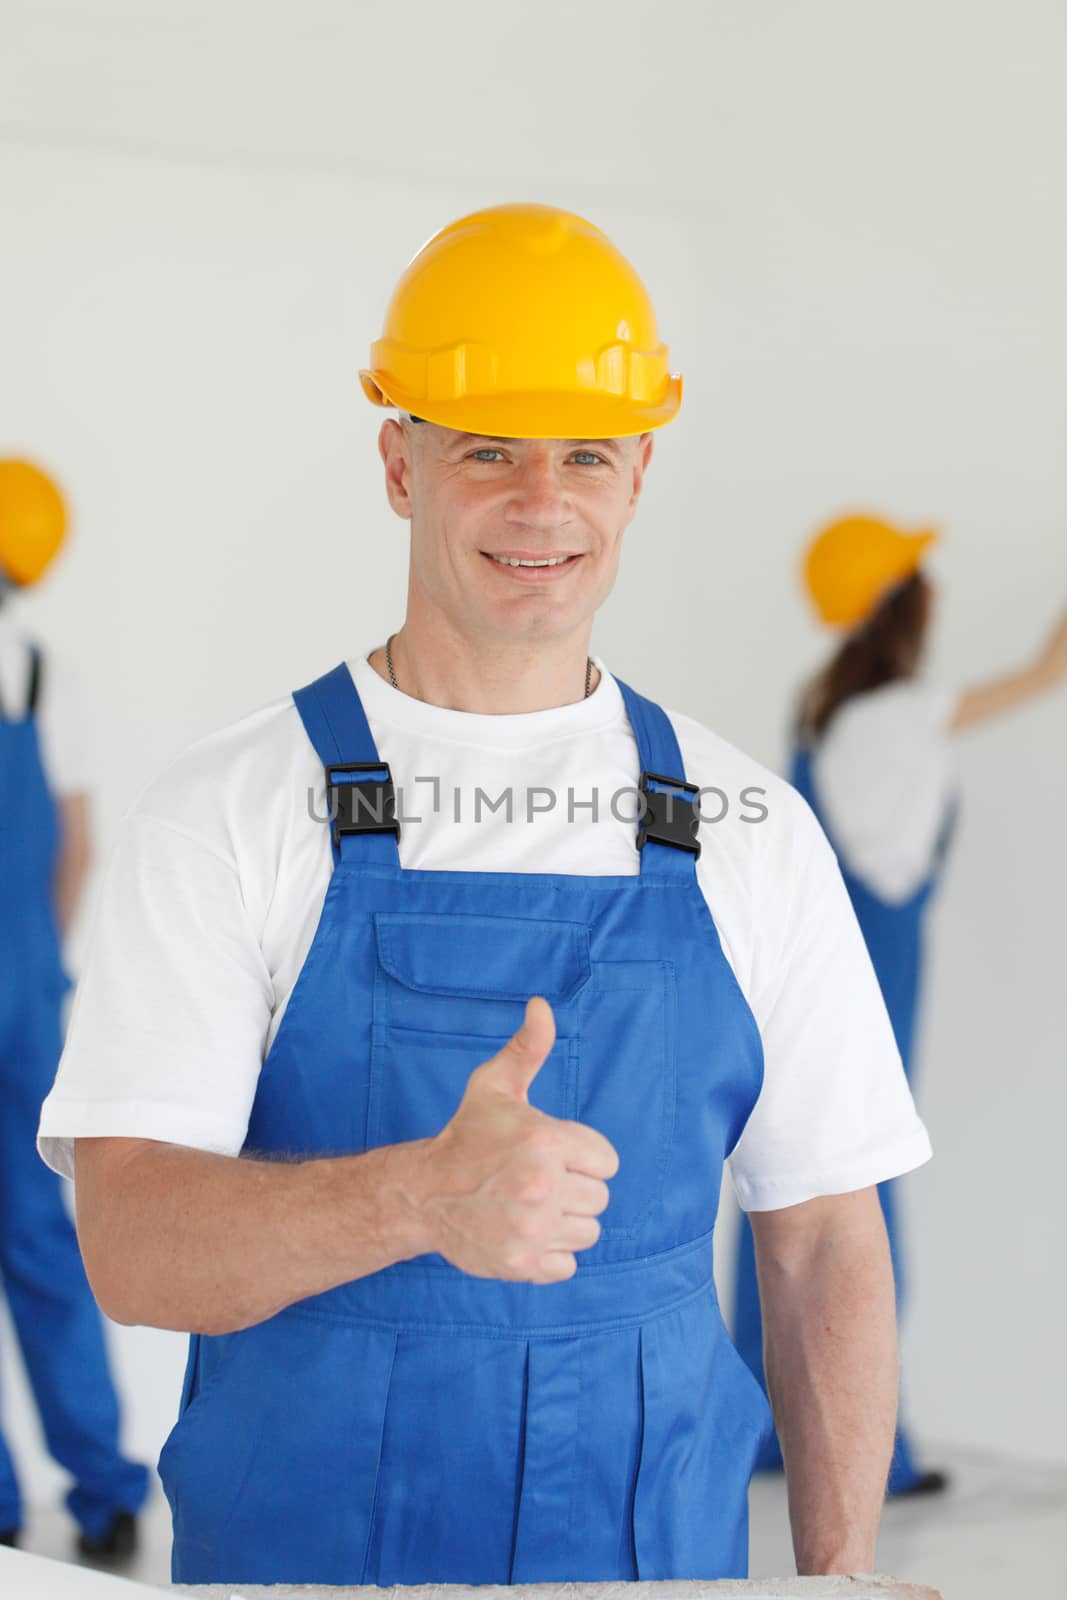 workman gives thumbs up by ALotOfPeople